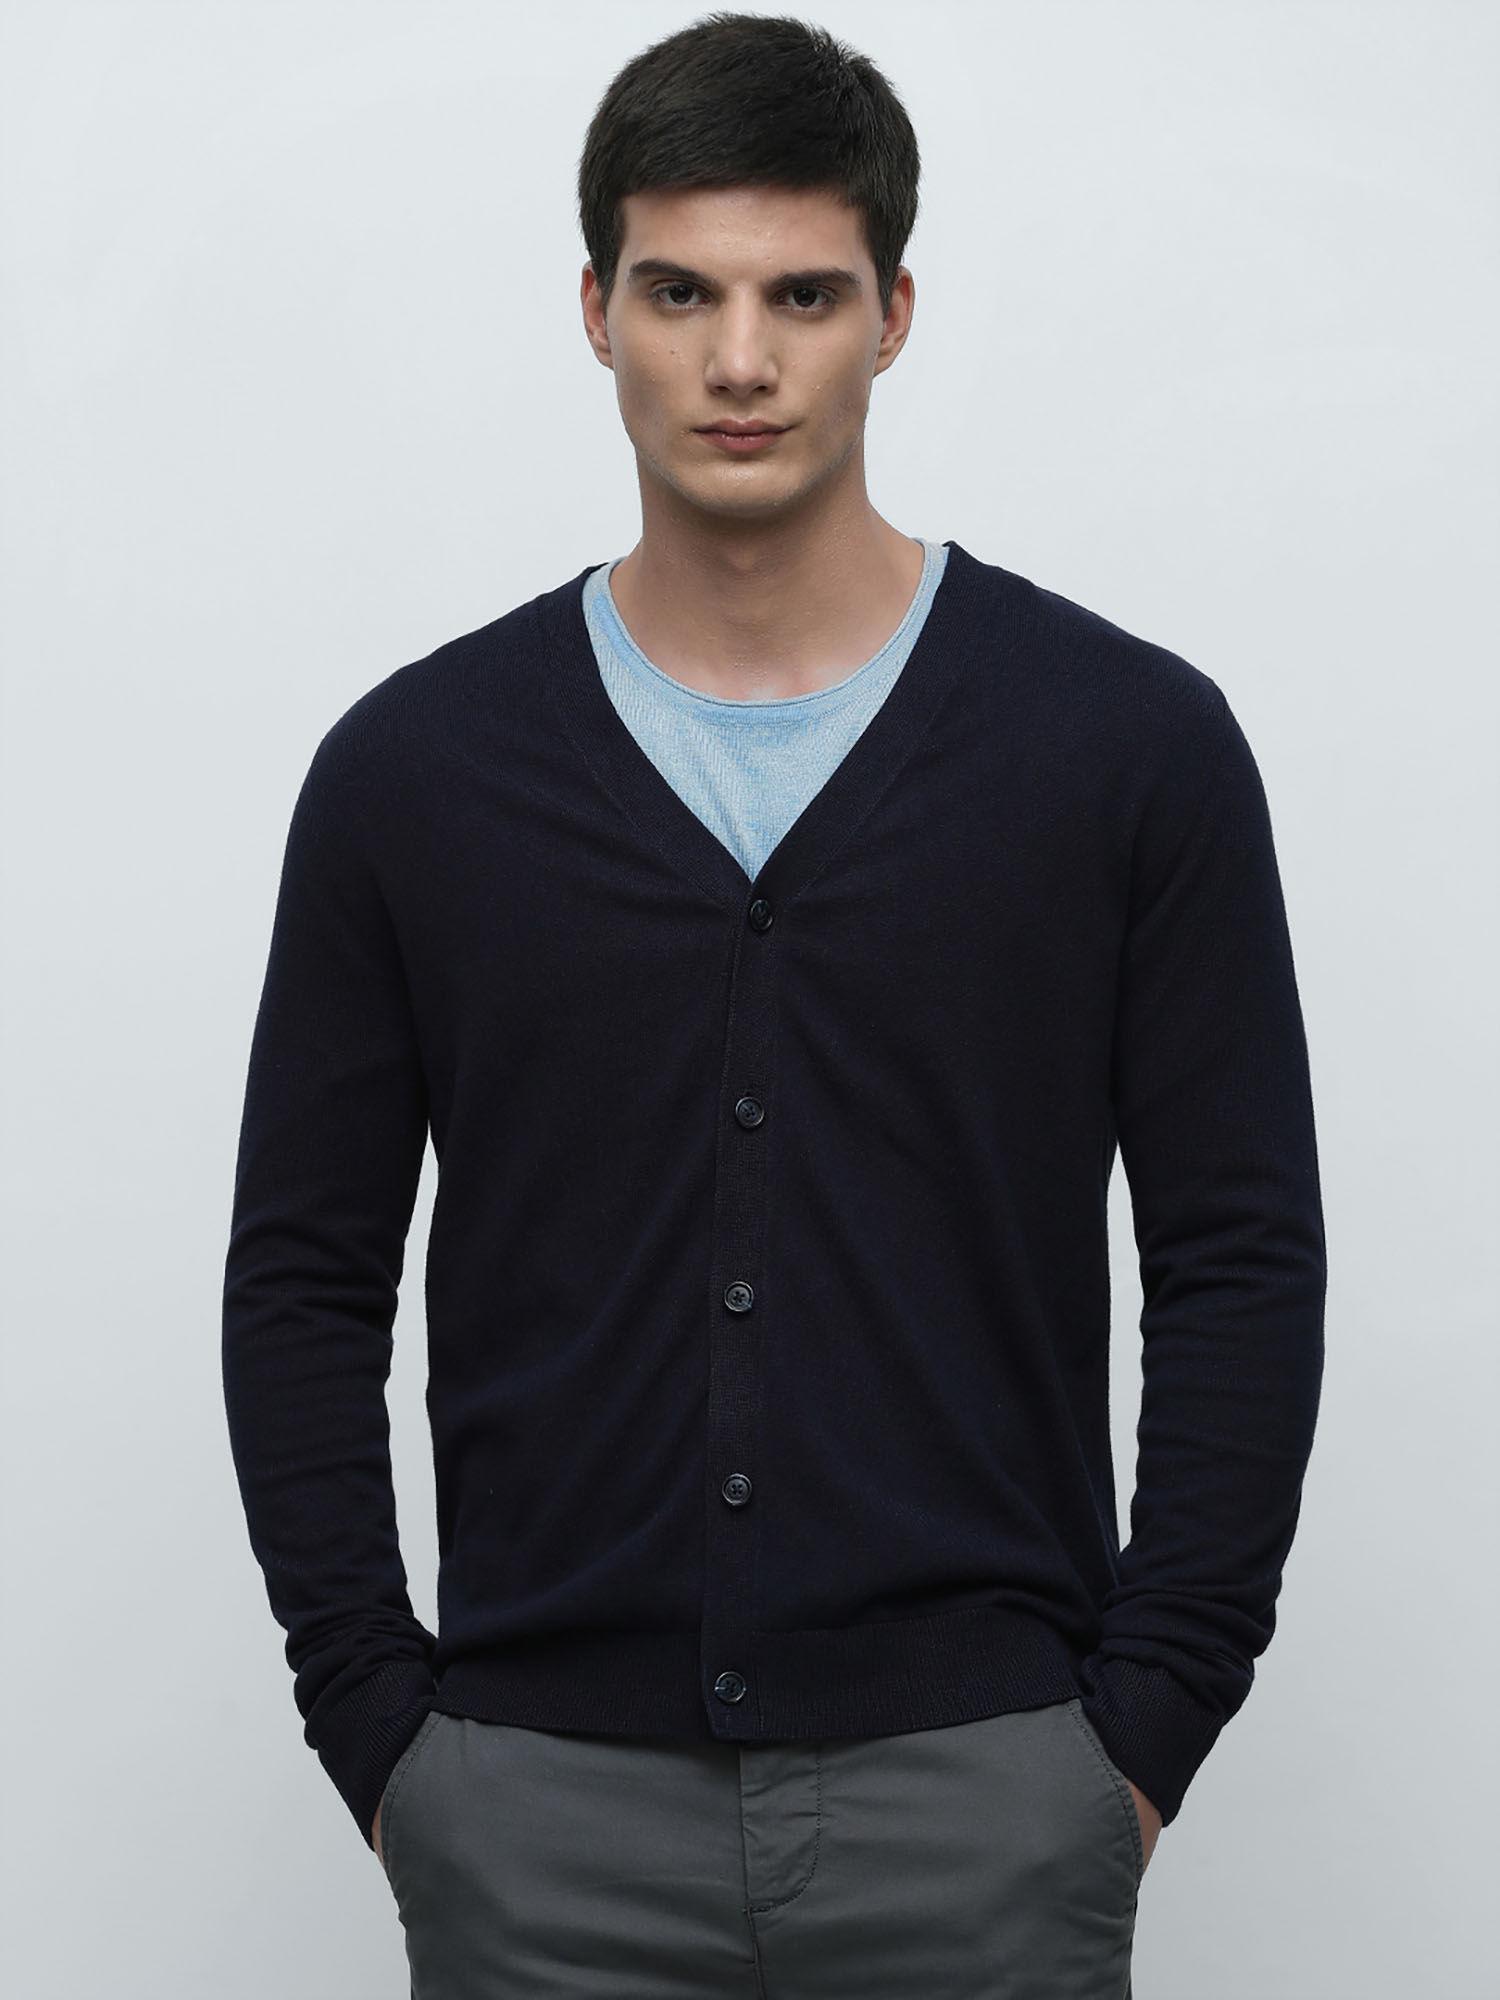 navy-blue-knitted-cardigan